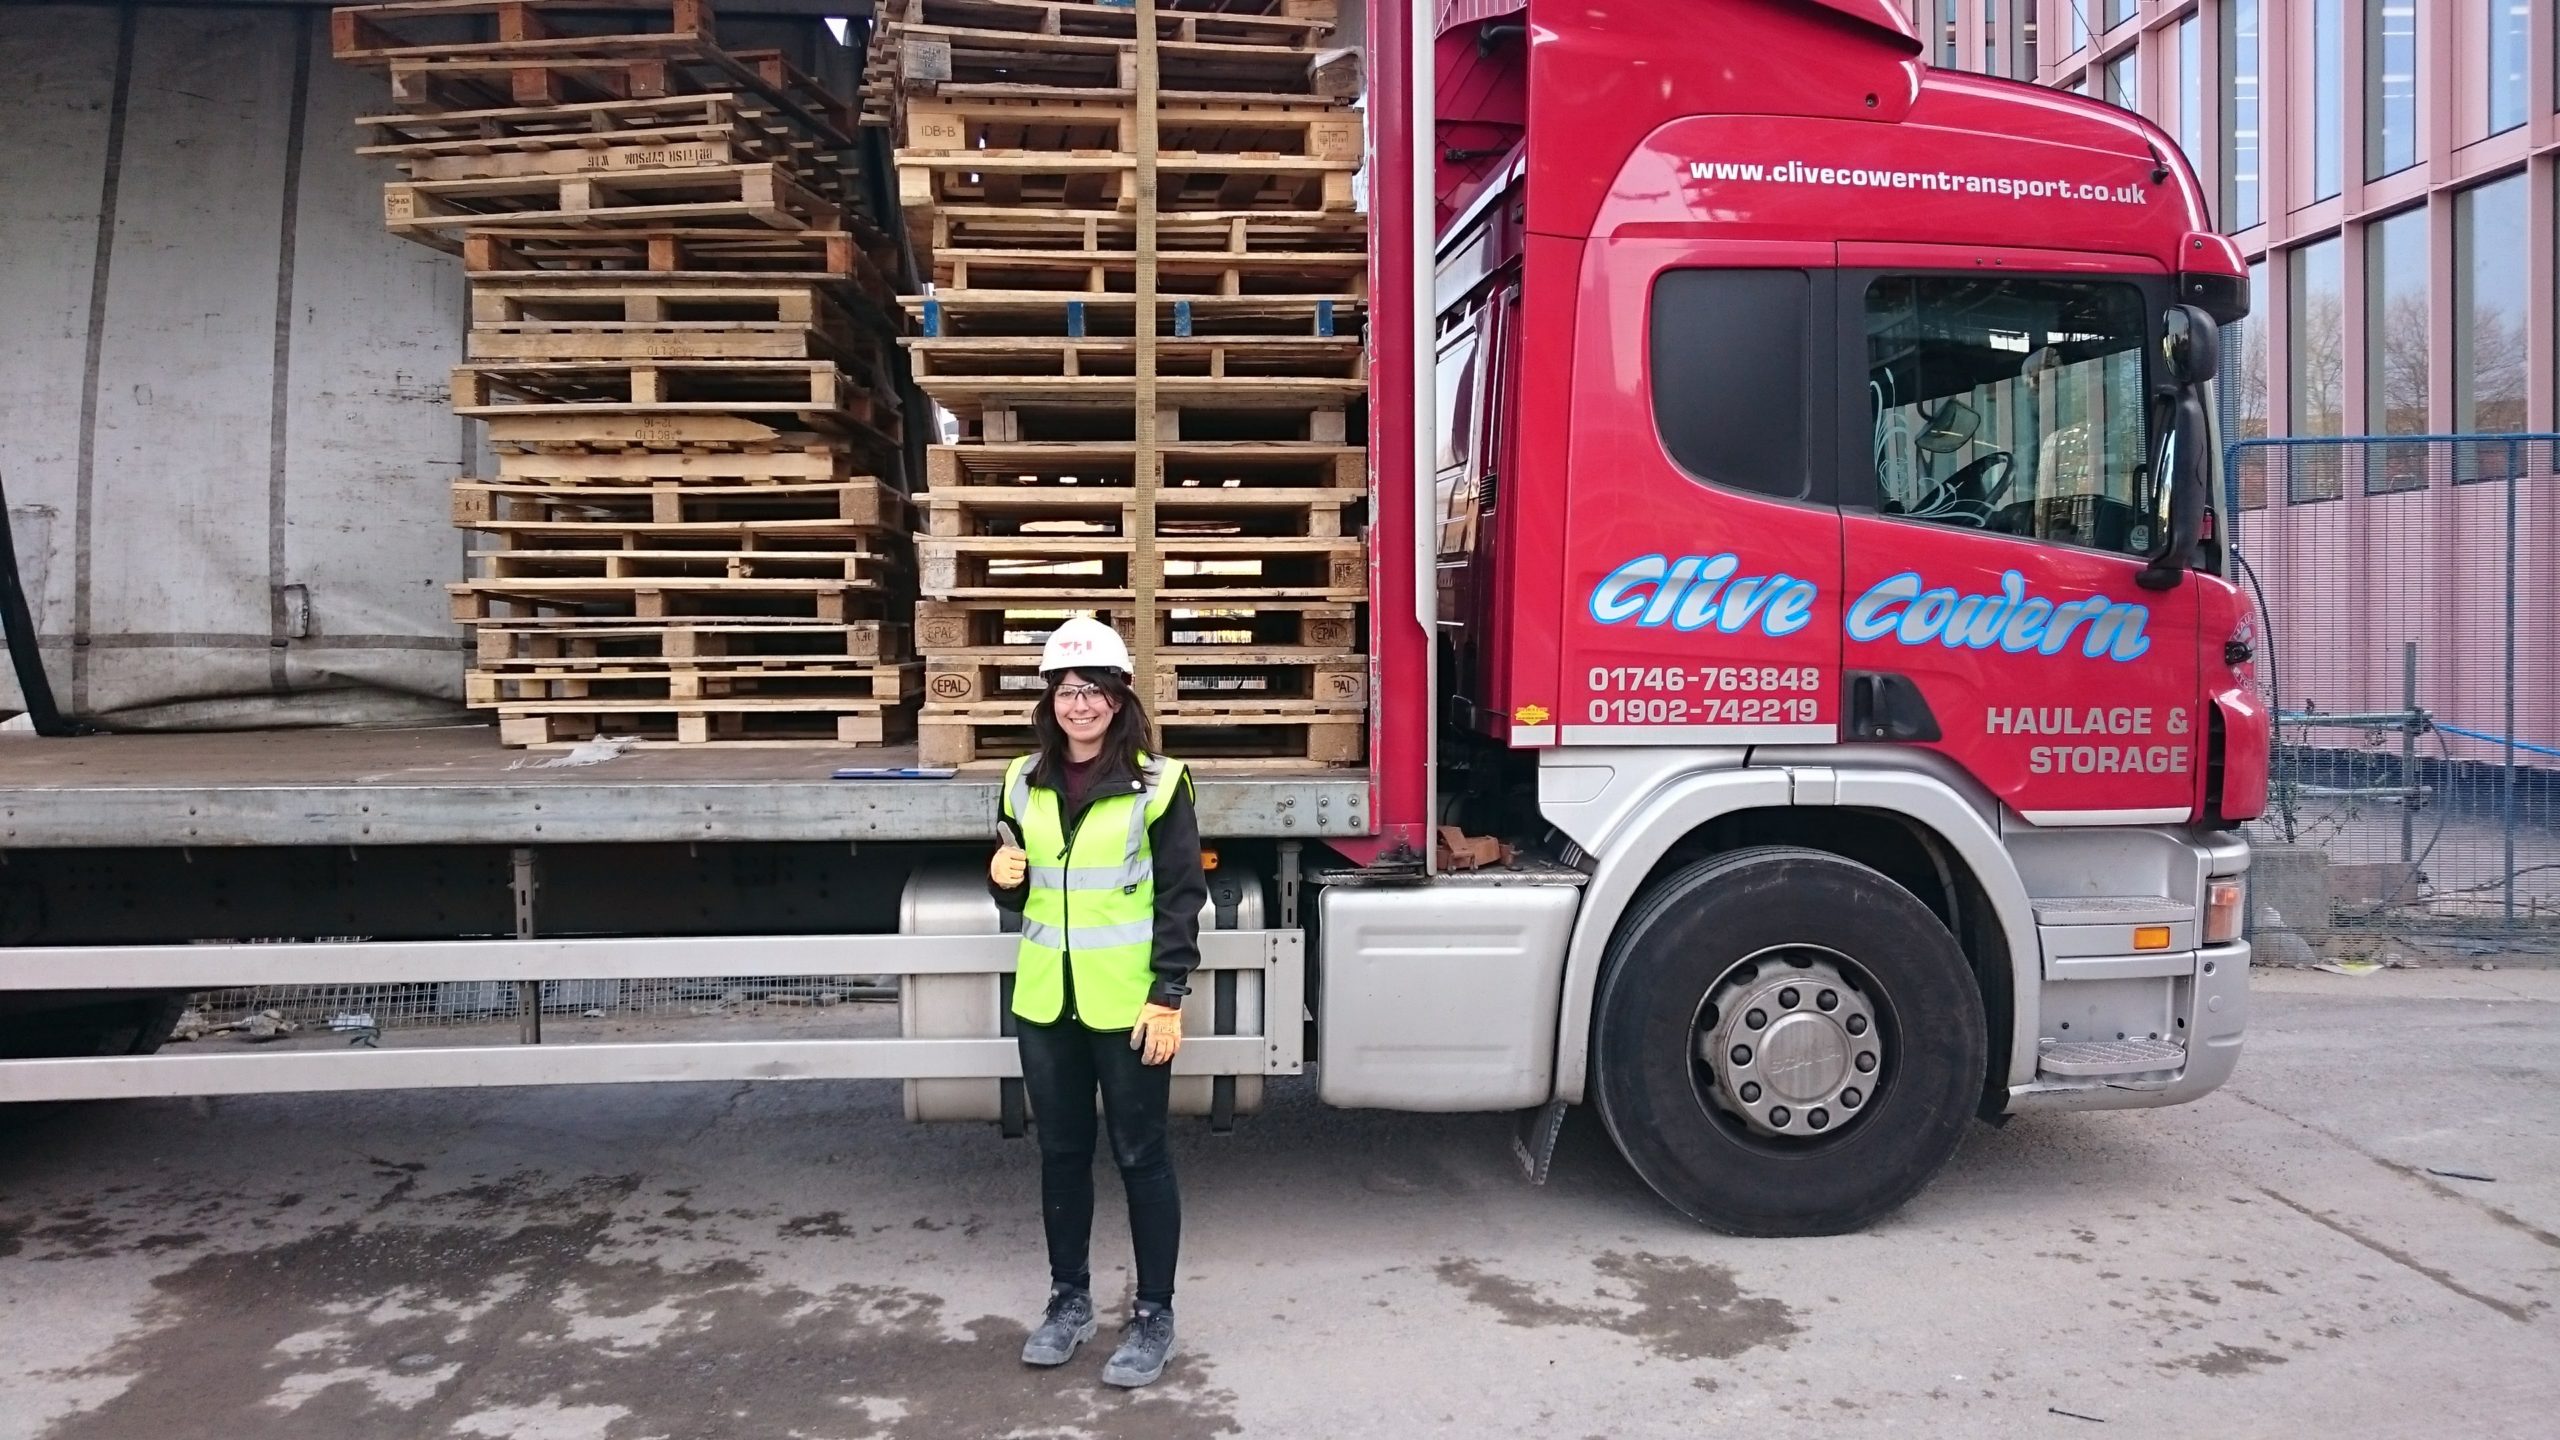 Moving on up: Joanna's first environmental initiative implemented on her first project - returning pallets to suppliers, keeping them out of the waste stream.